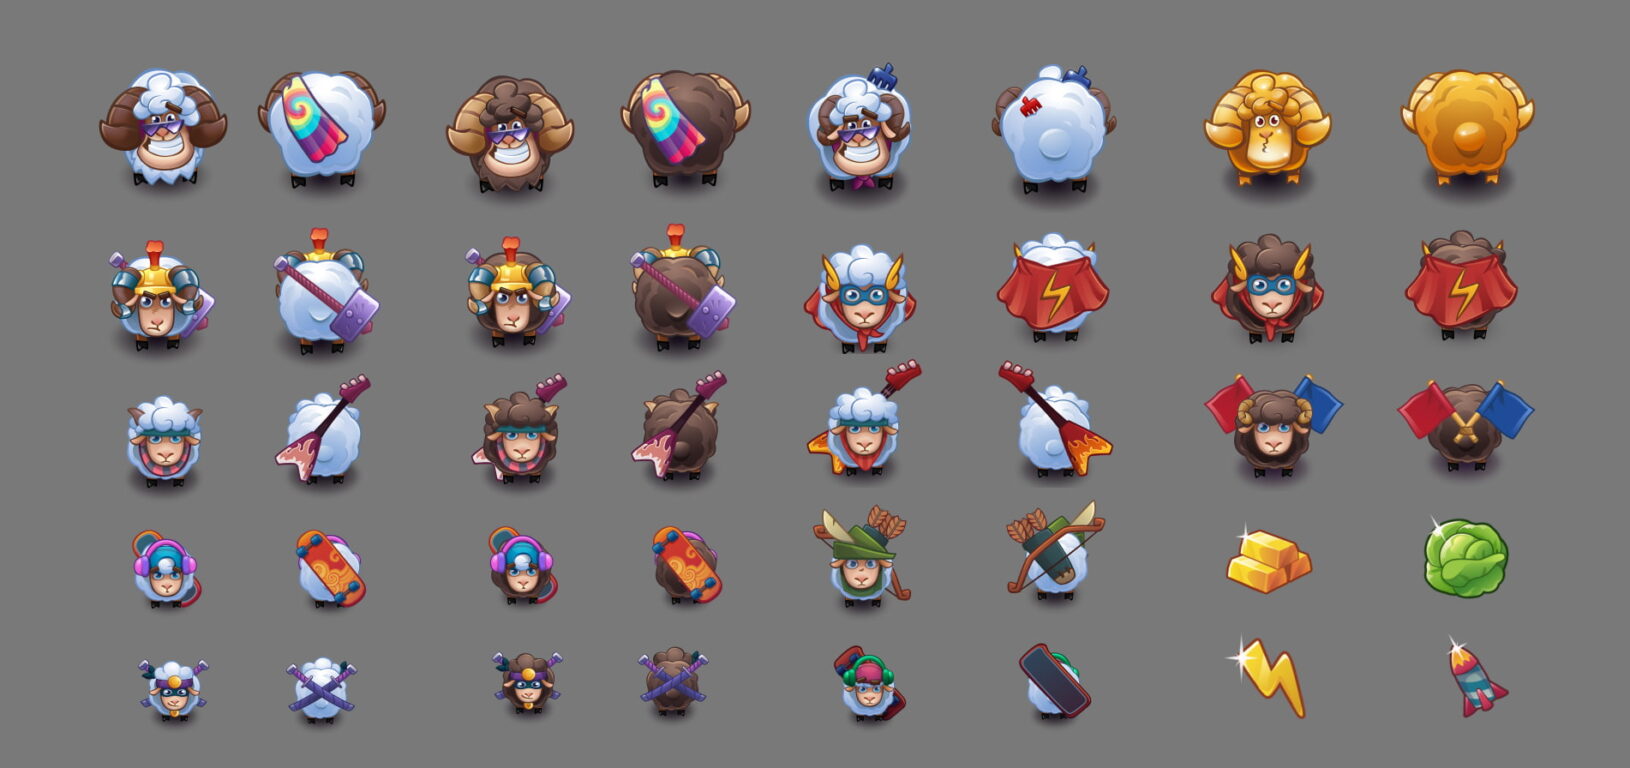 Sheep Fight game characters design